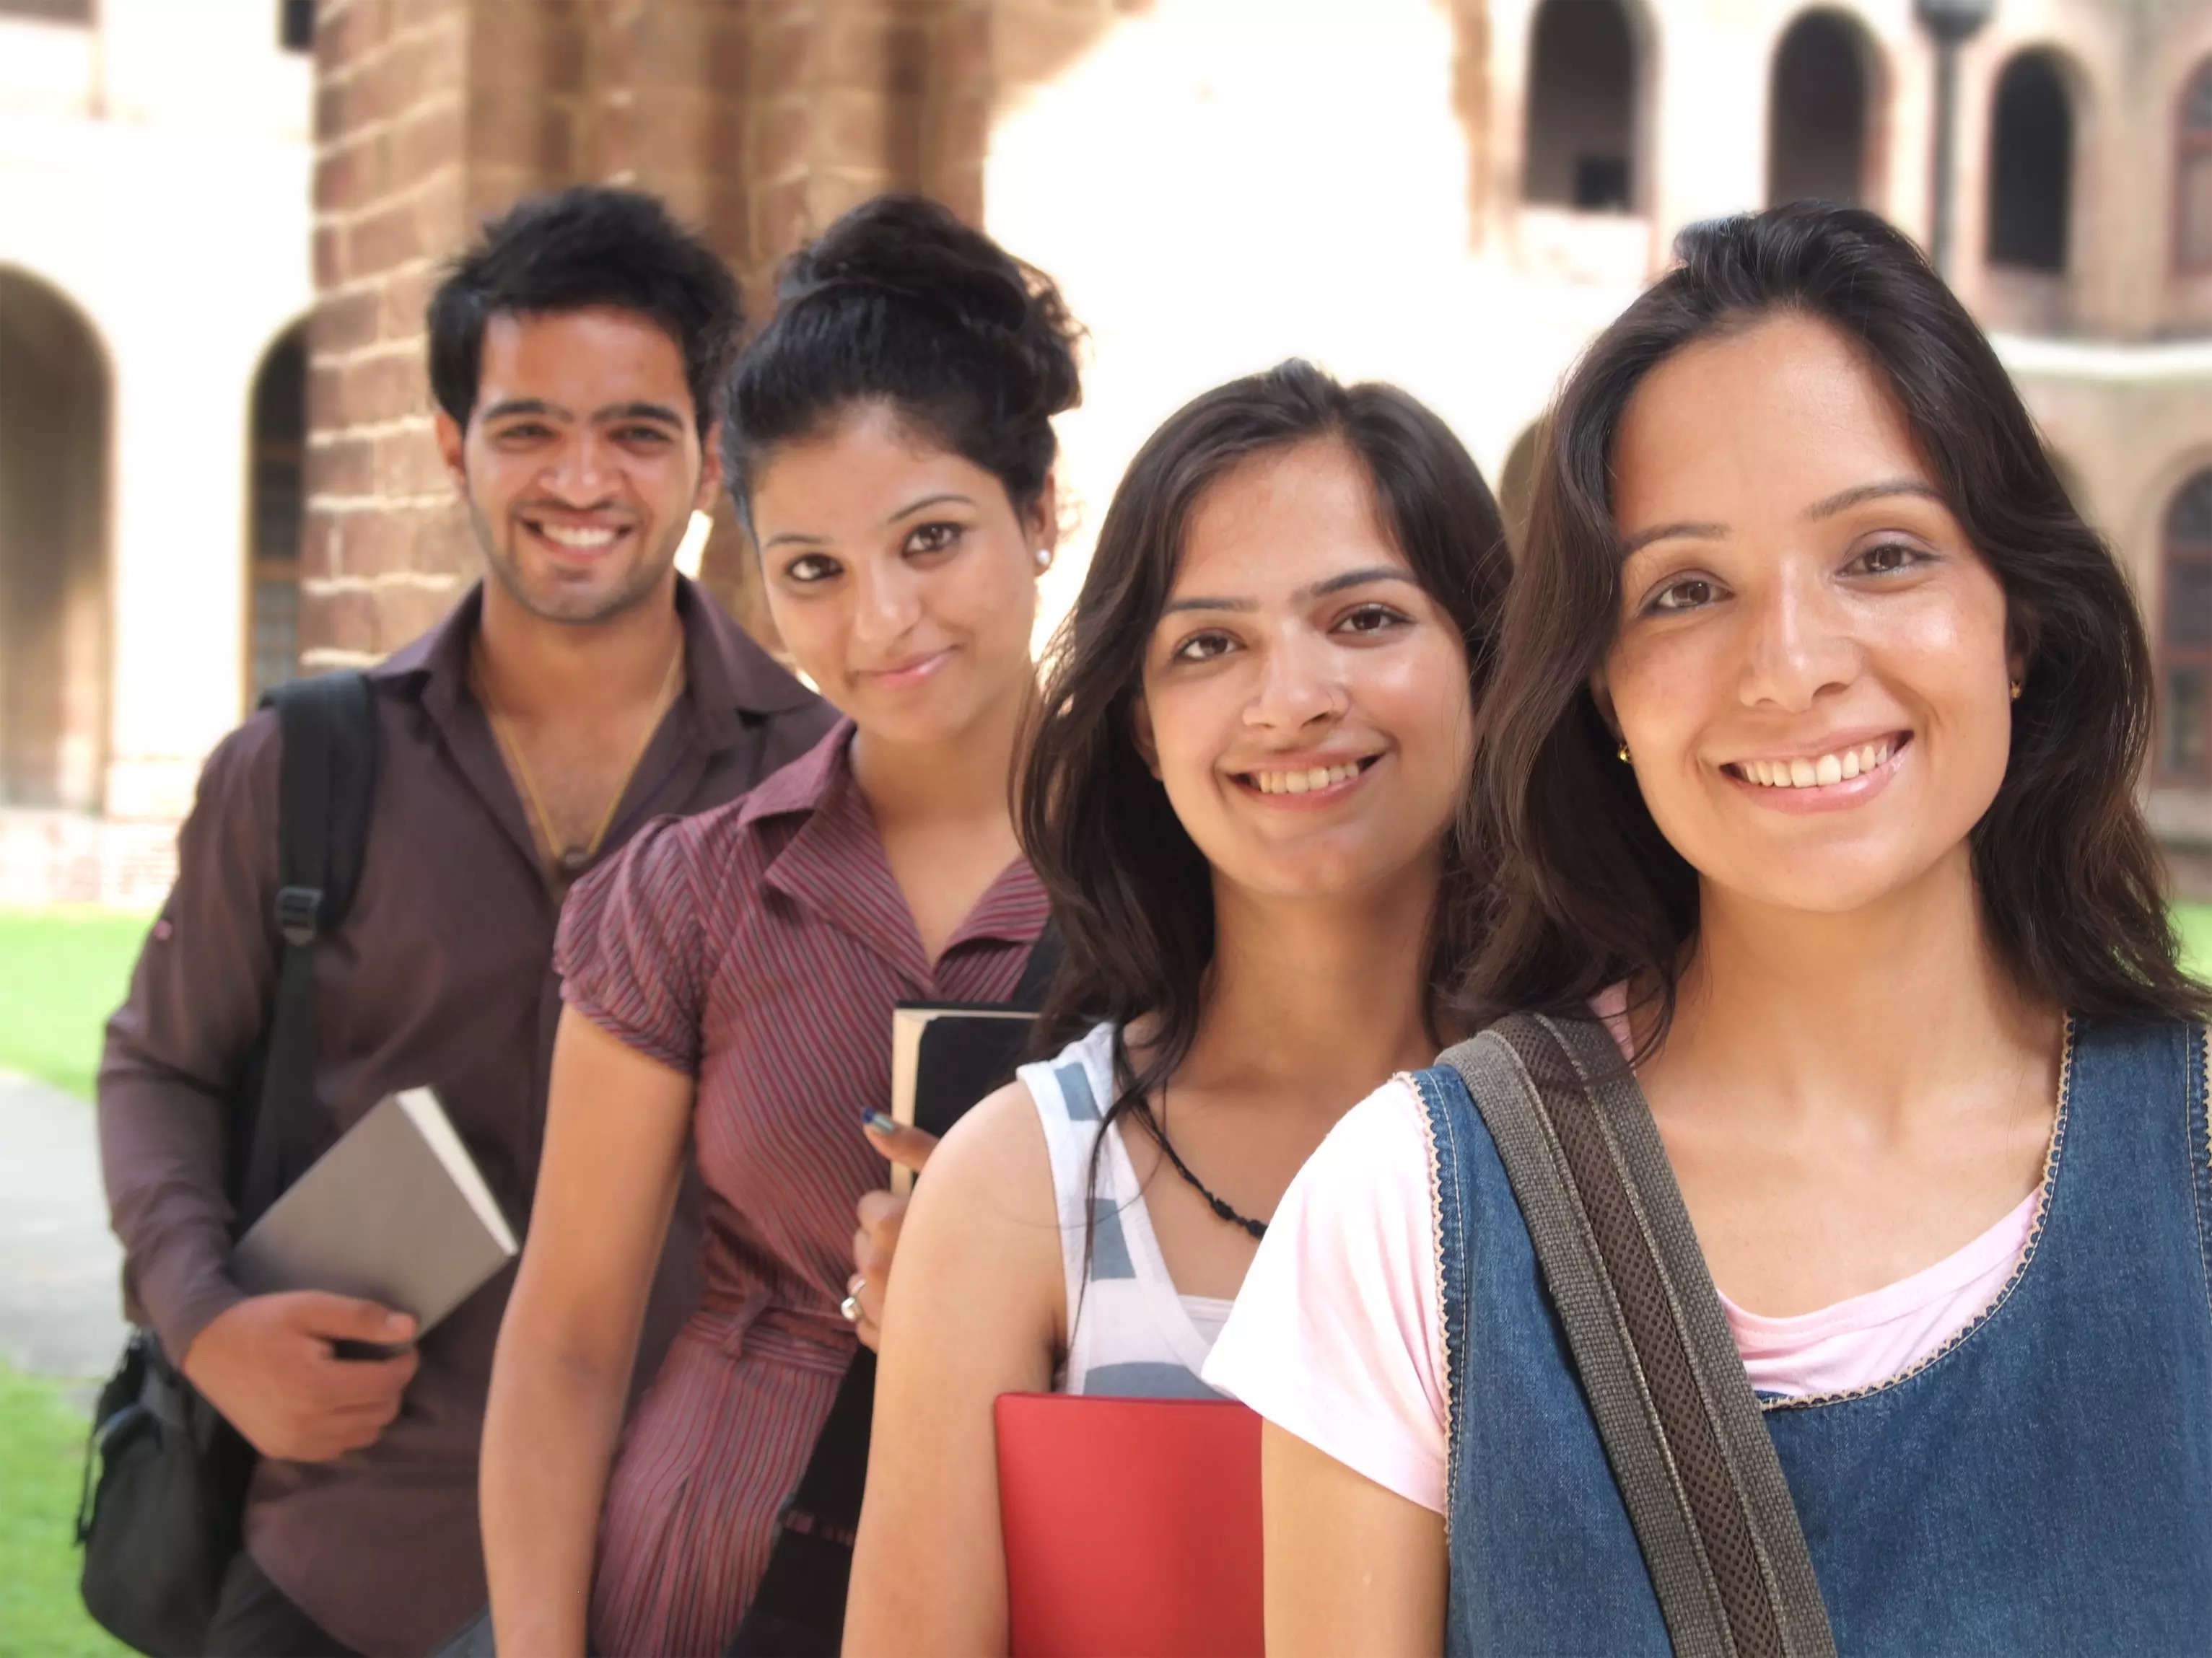 Admission process at Central Universities in Delhi